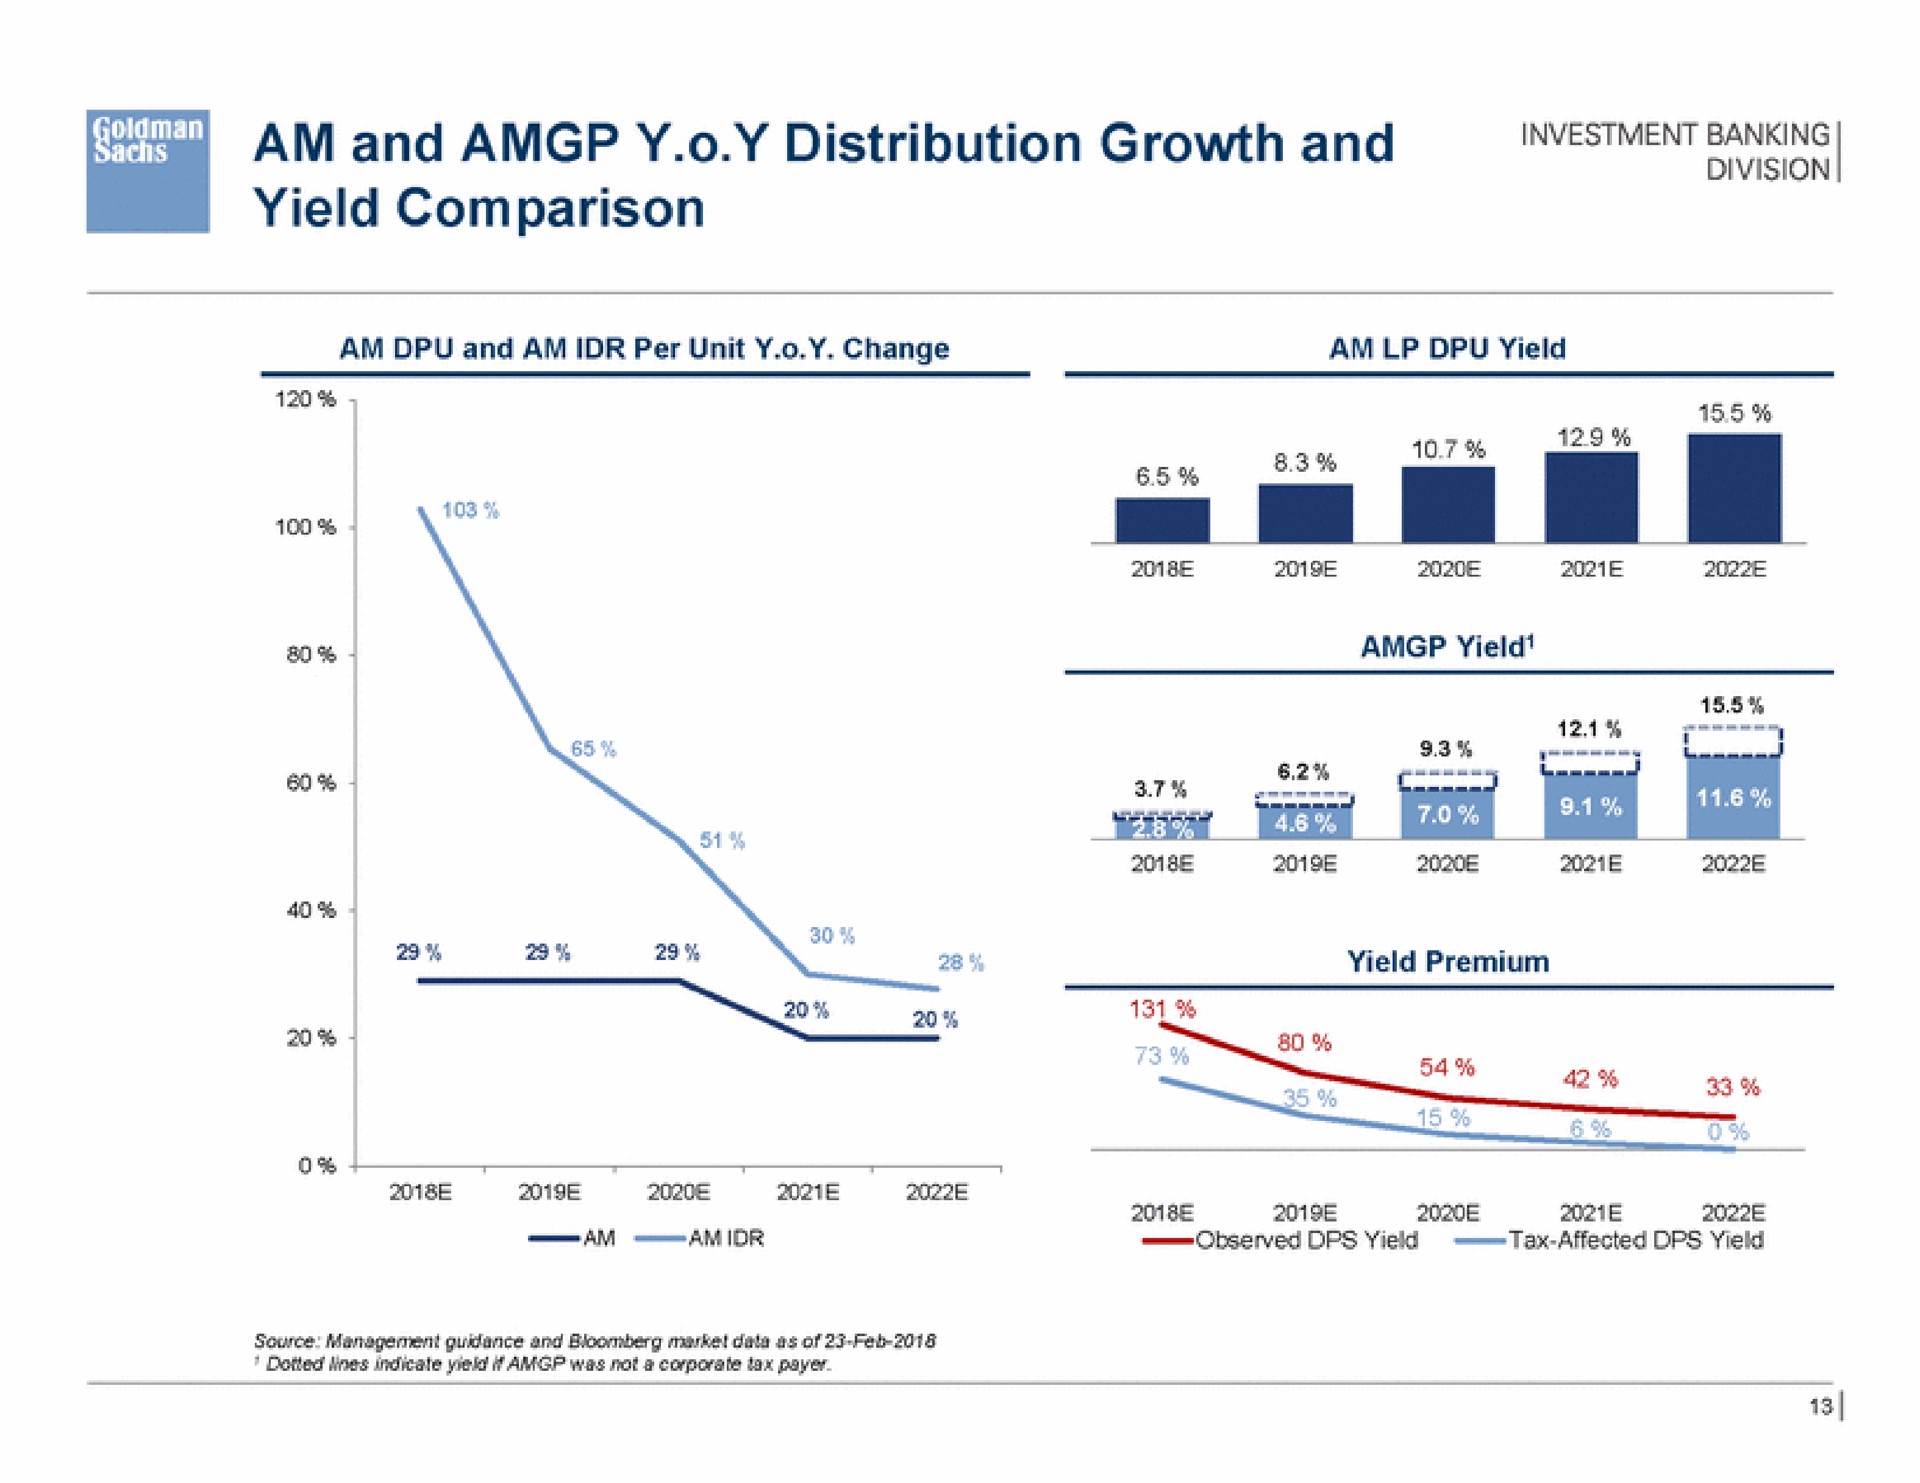 am and distribution growth and yield comparison | Goldman Sachs